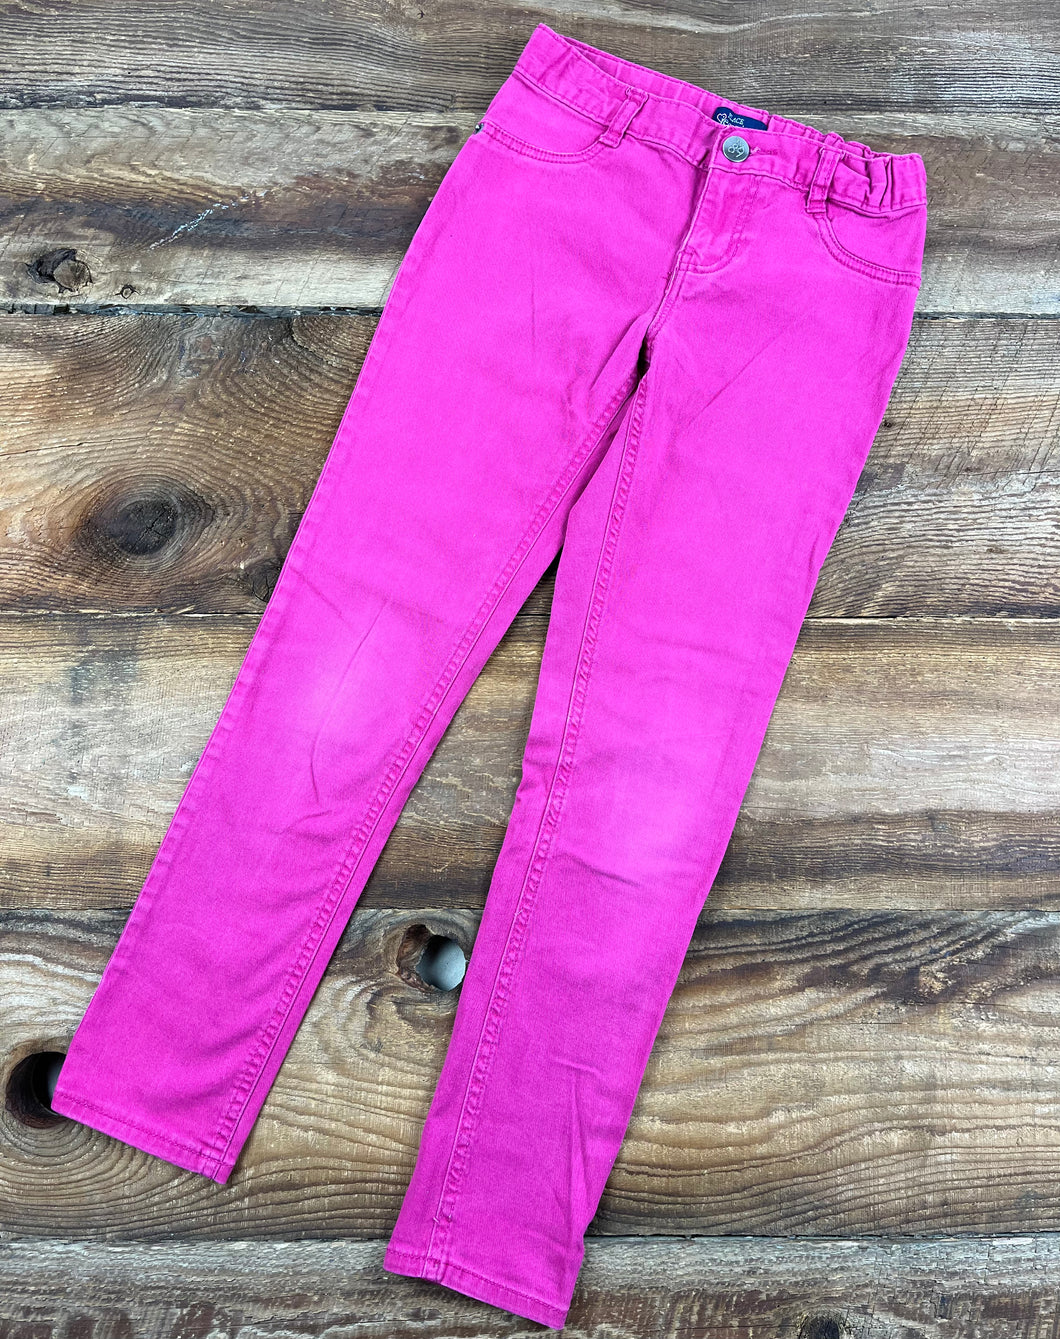 The Children’s Place size 10 Jegging